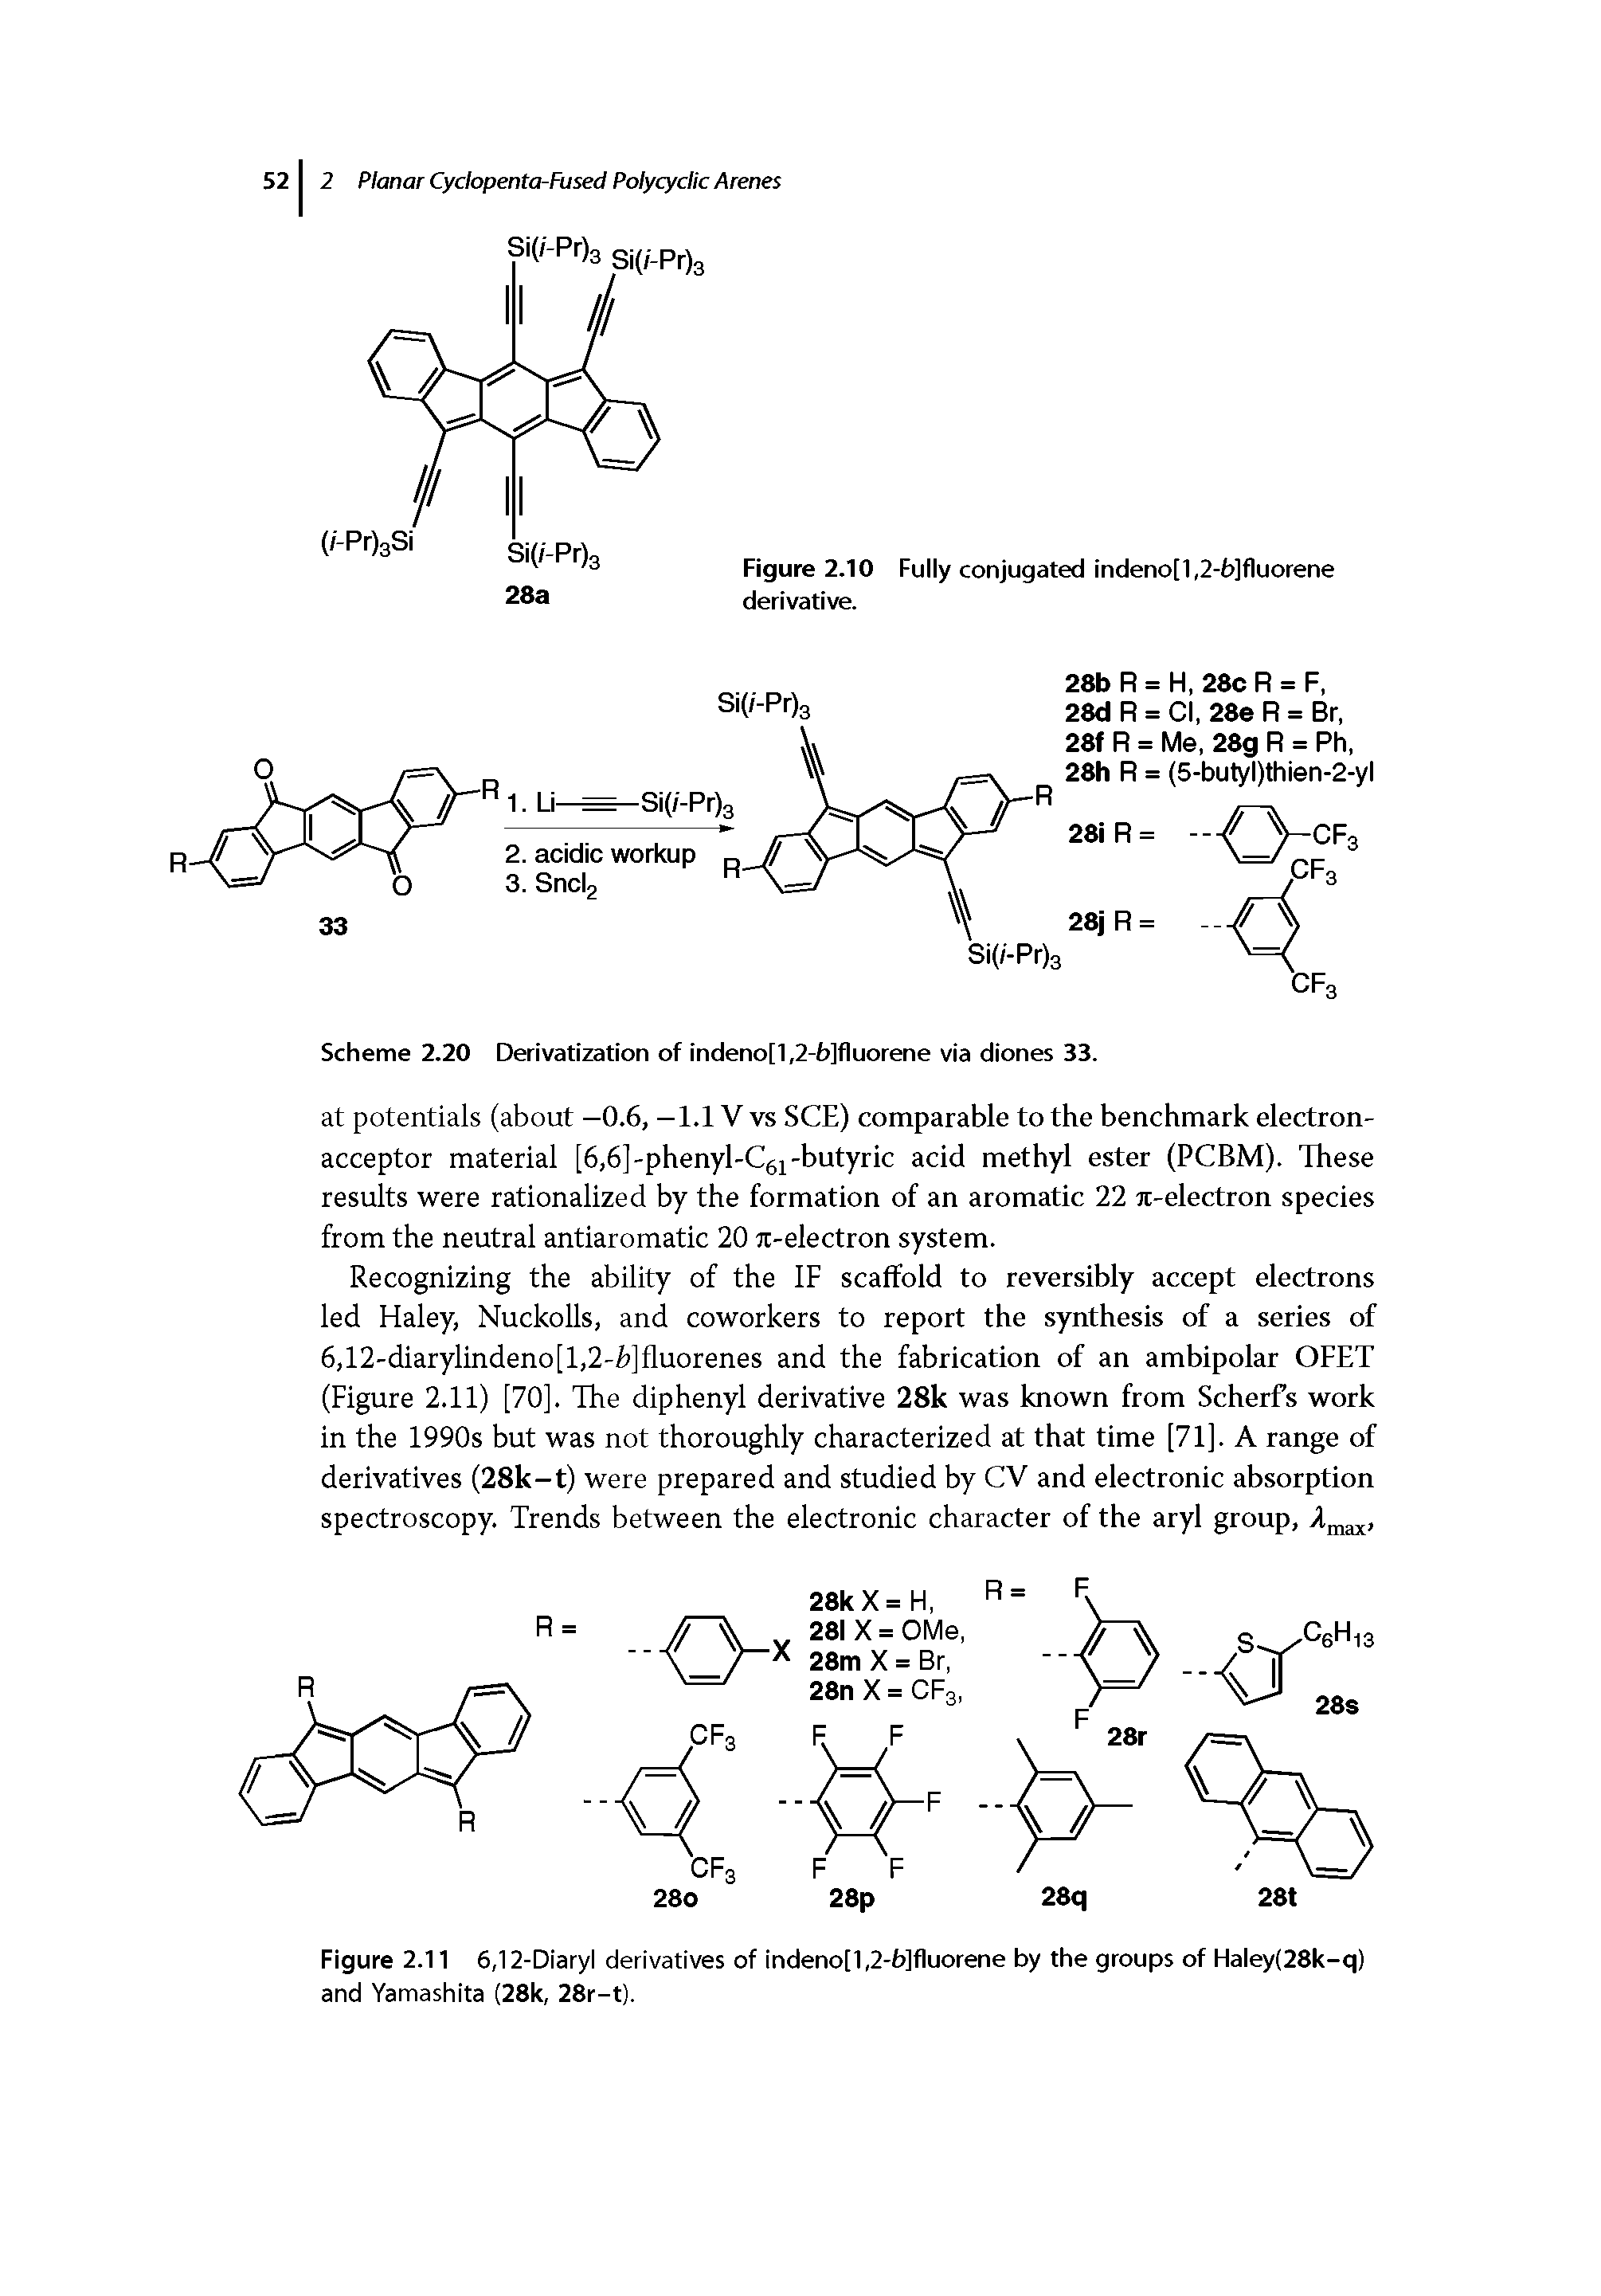 Figure 2.11 6,12-Diaryl derivatives of indeno[1,2-6]fluorene by the groups of Haiey(28k-q) and Yamashita (28k, 28r-t).